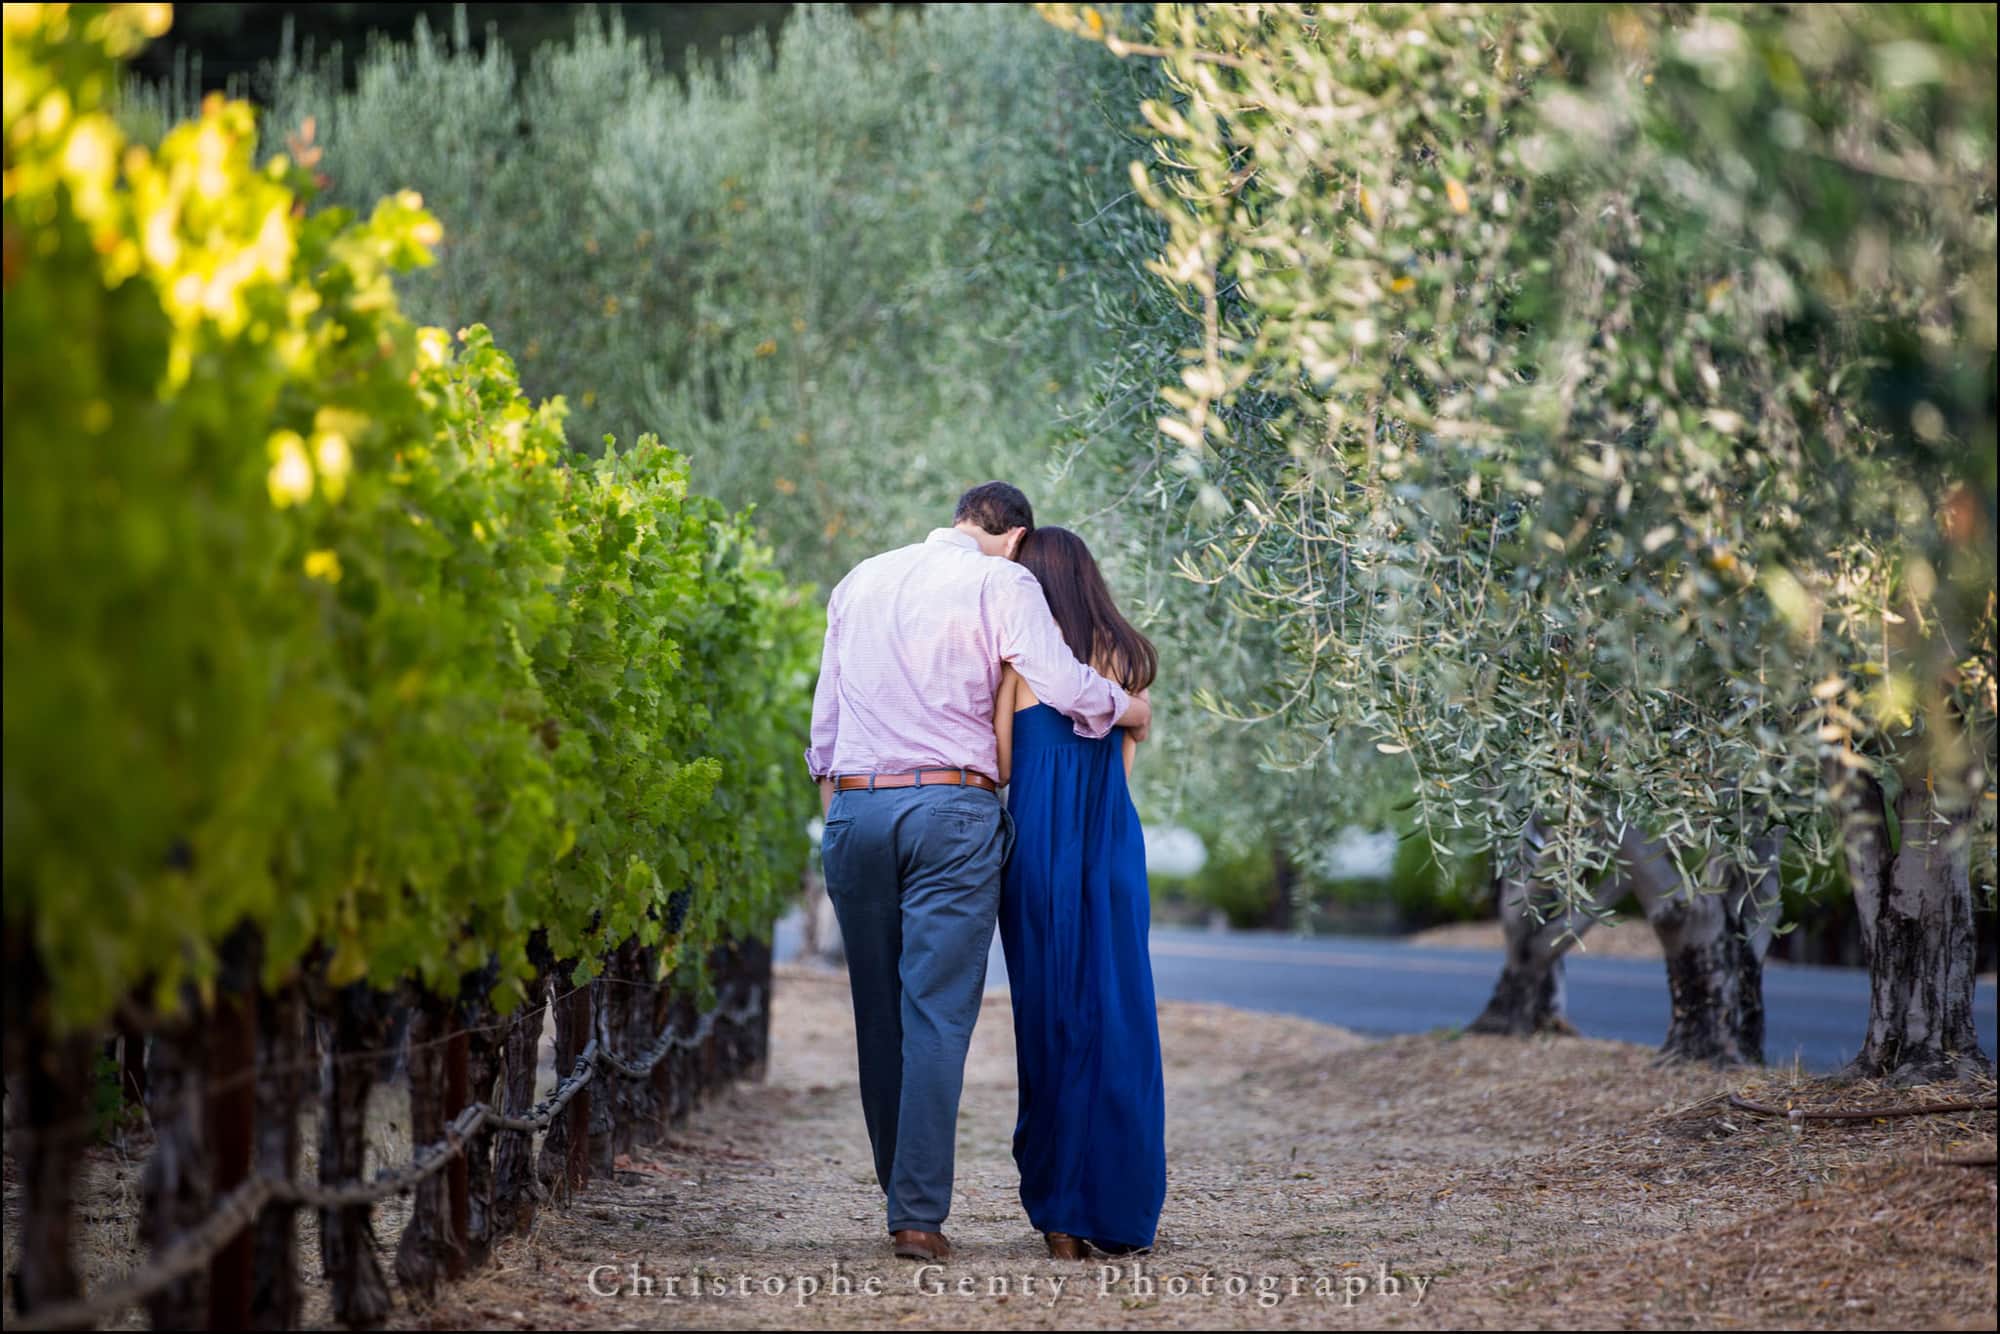 Marriage Proposal Photography at Meadowood Napa Valley